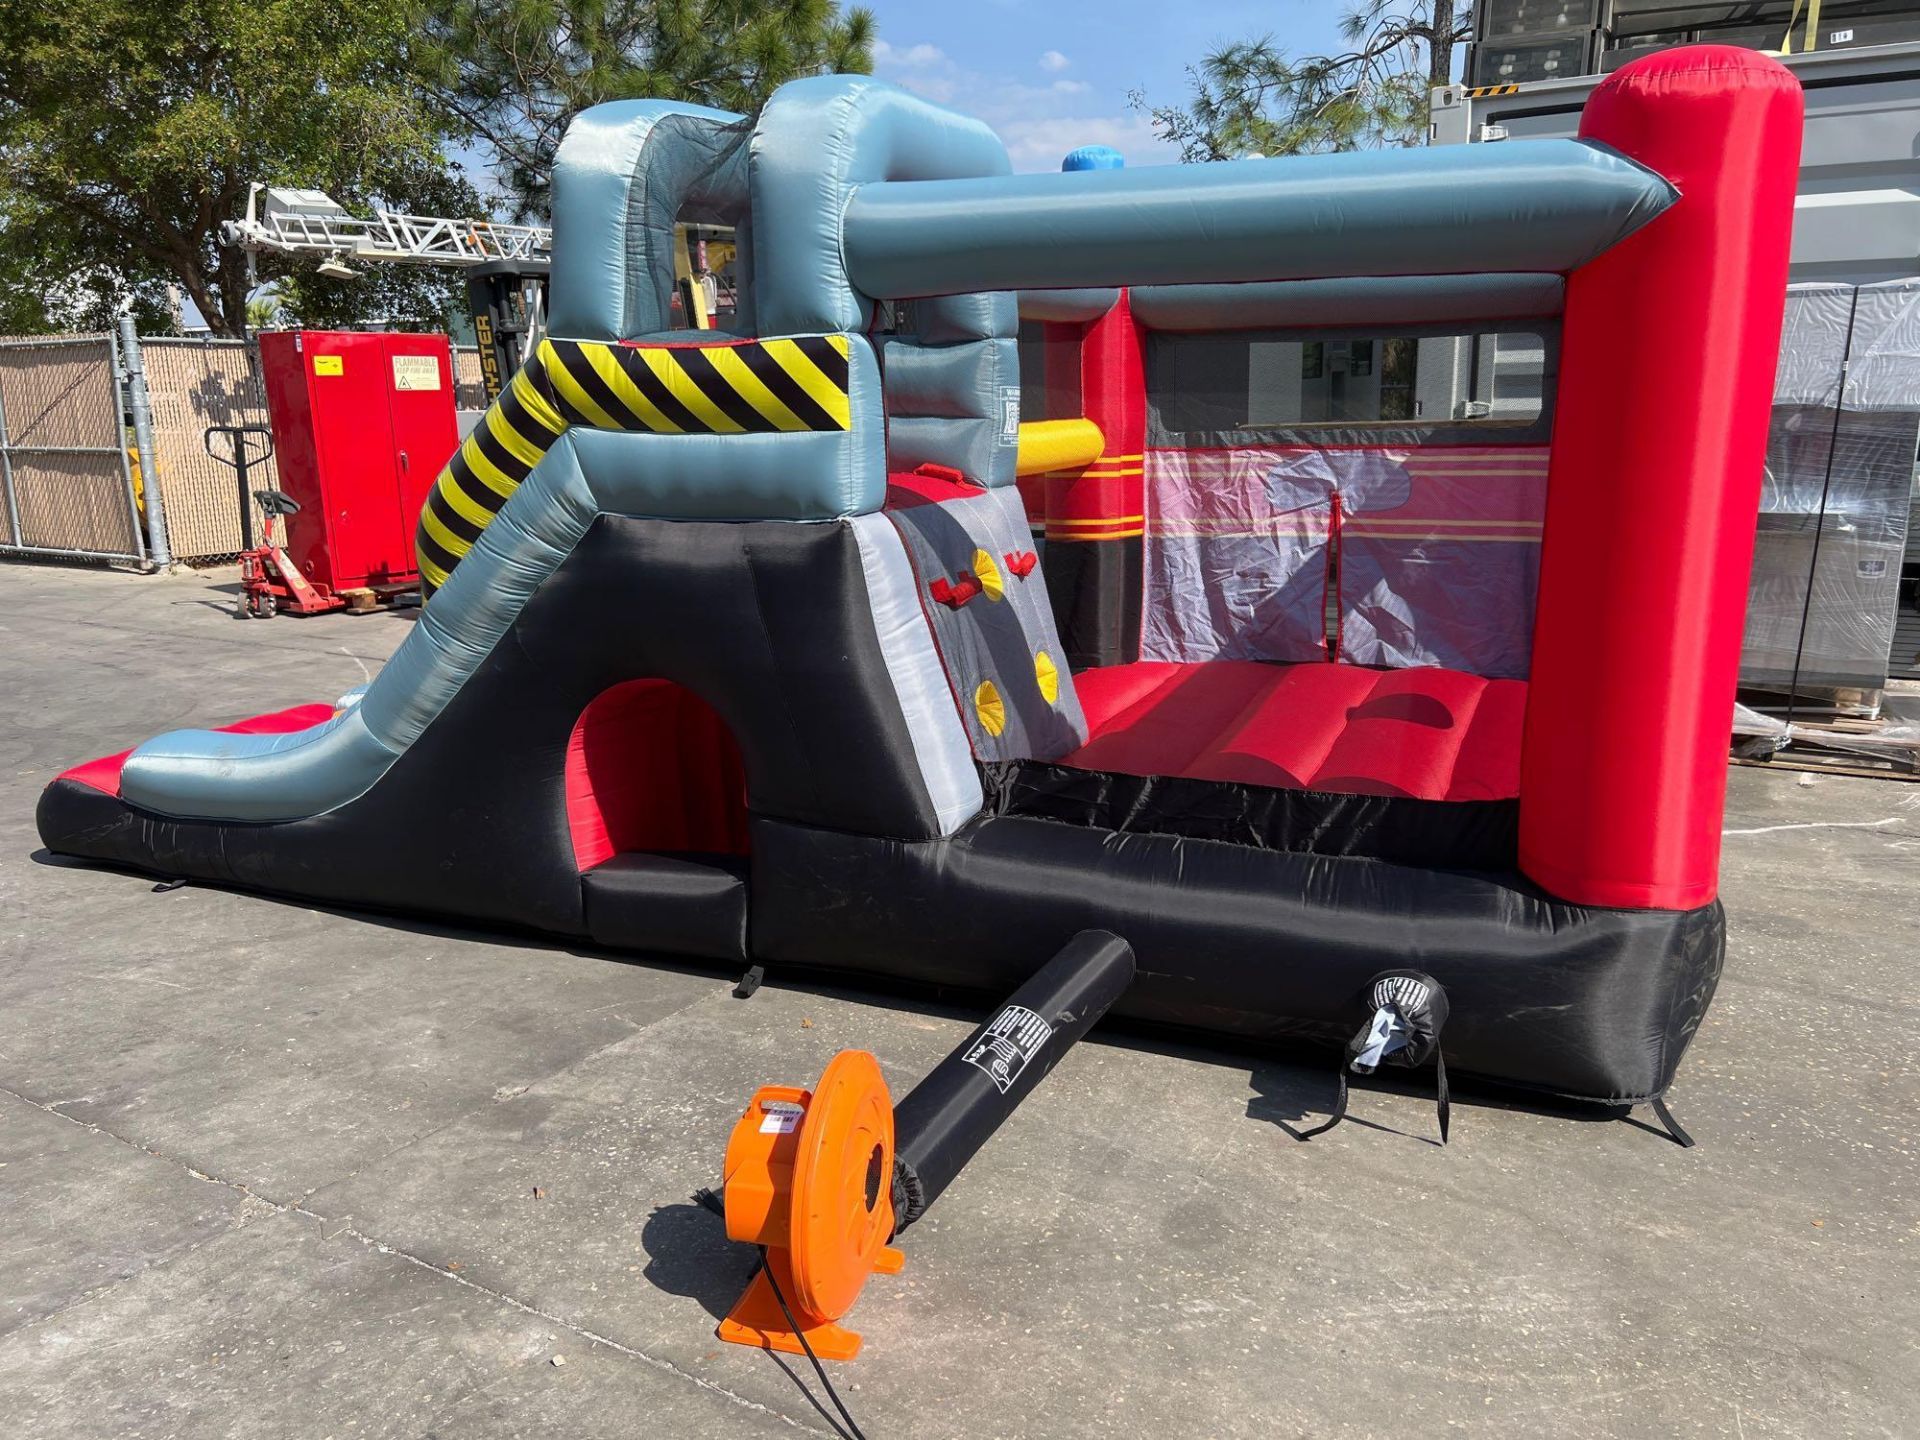 UNUSED BLOW-UP BOUNCY FIRE STATION PLAY YARD WITH SLIDE, VELCRO DARTS, BALLS, STAKES, & BLOWER - Image 5 of 12